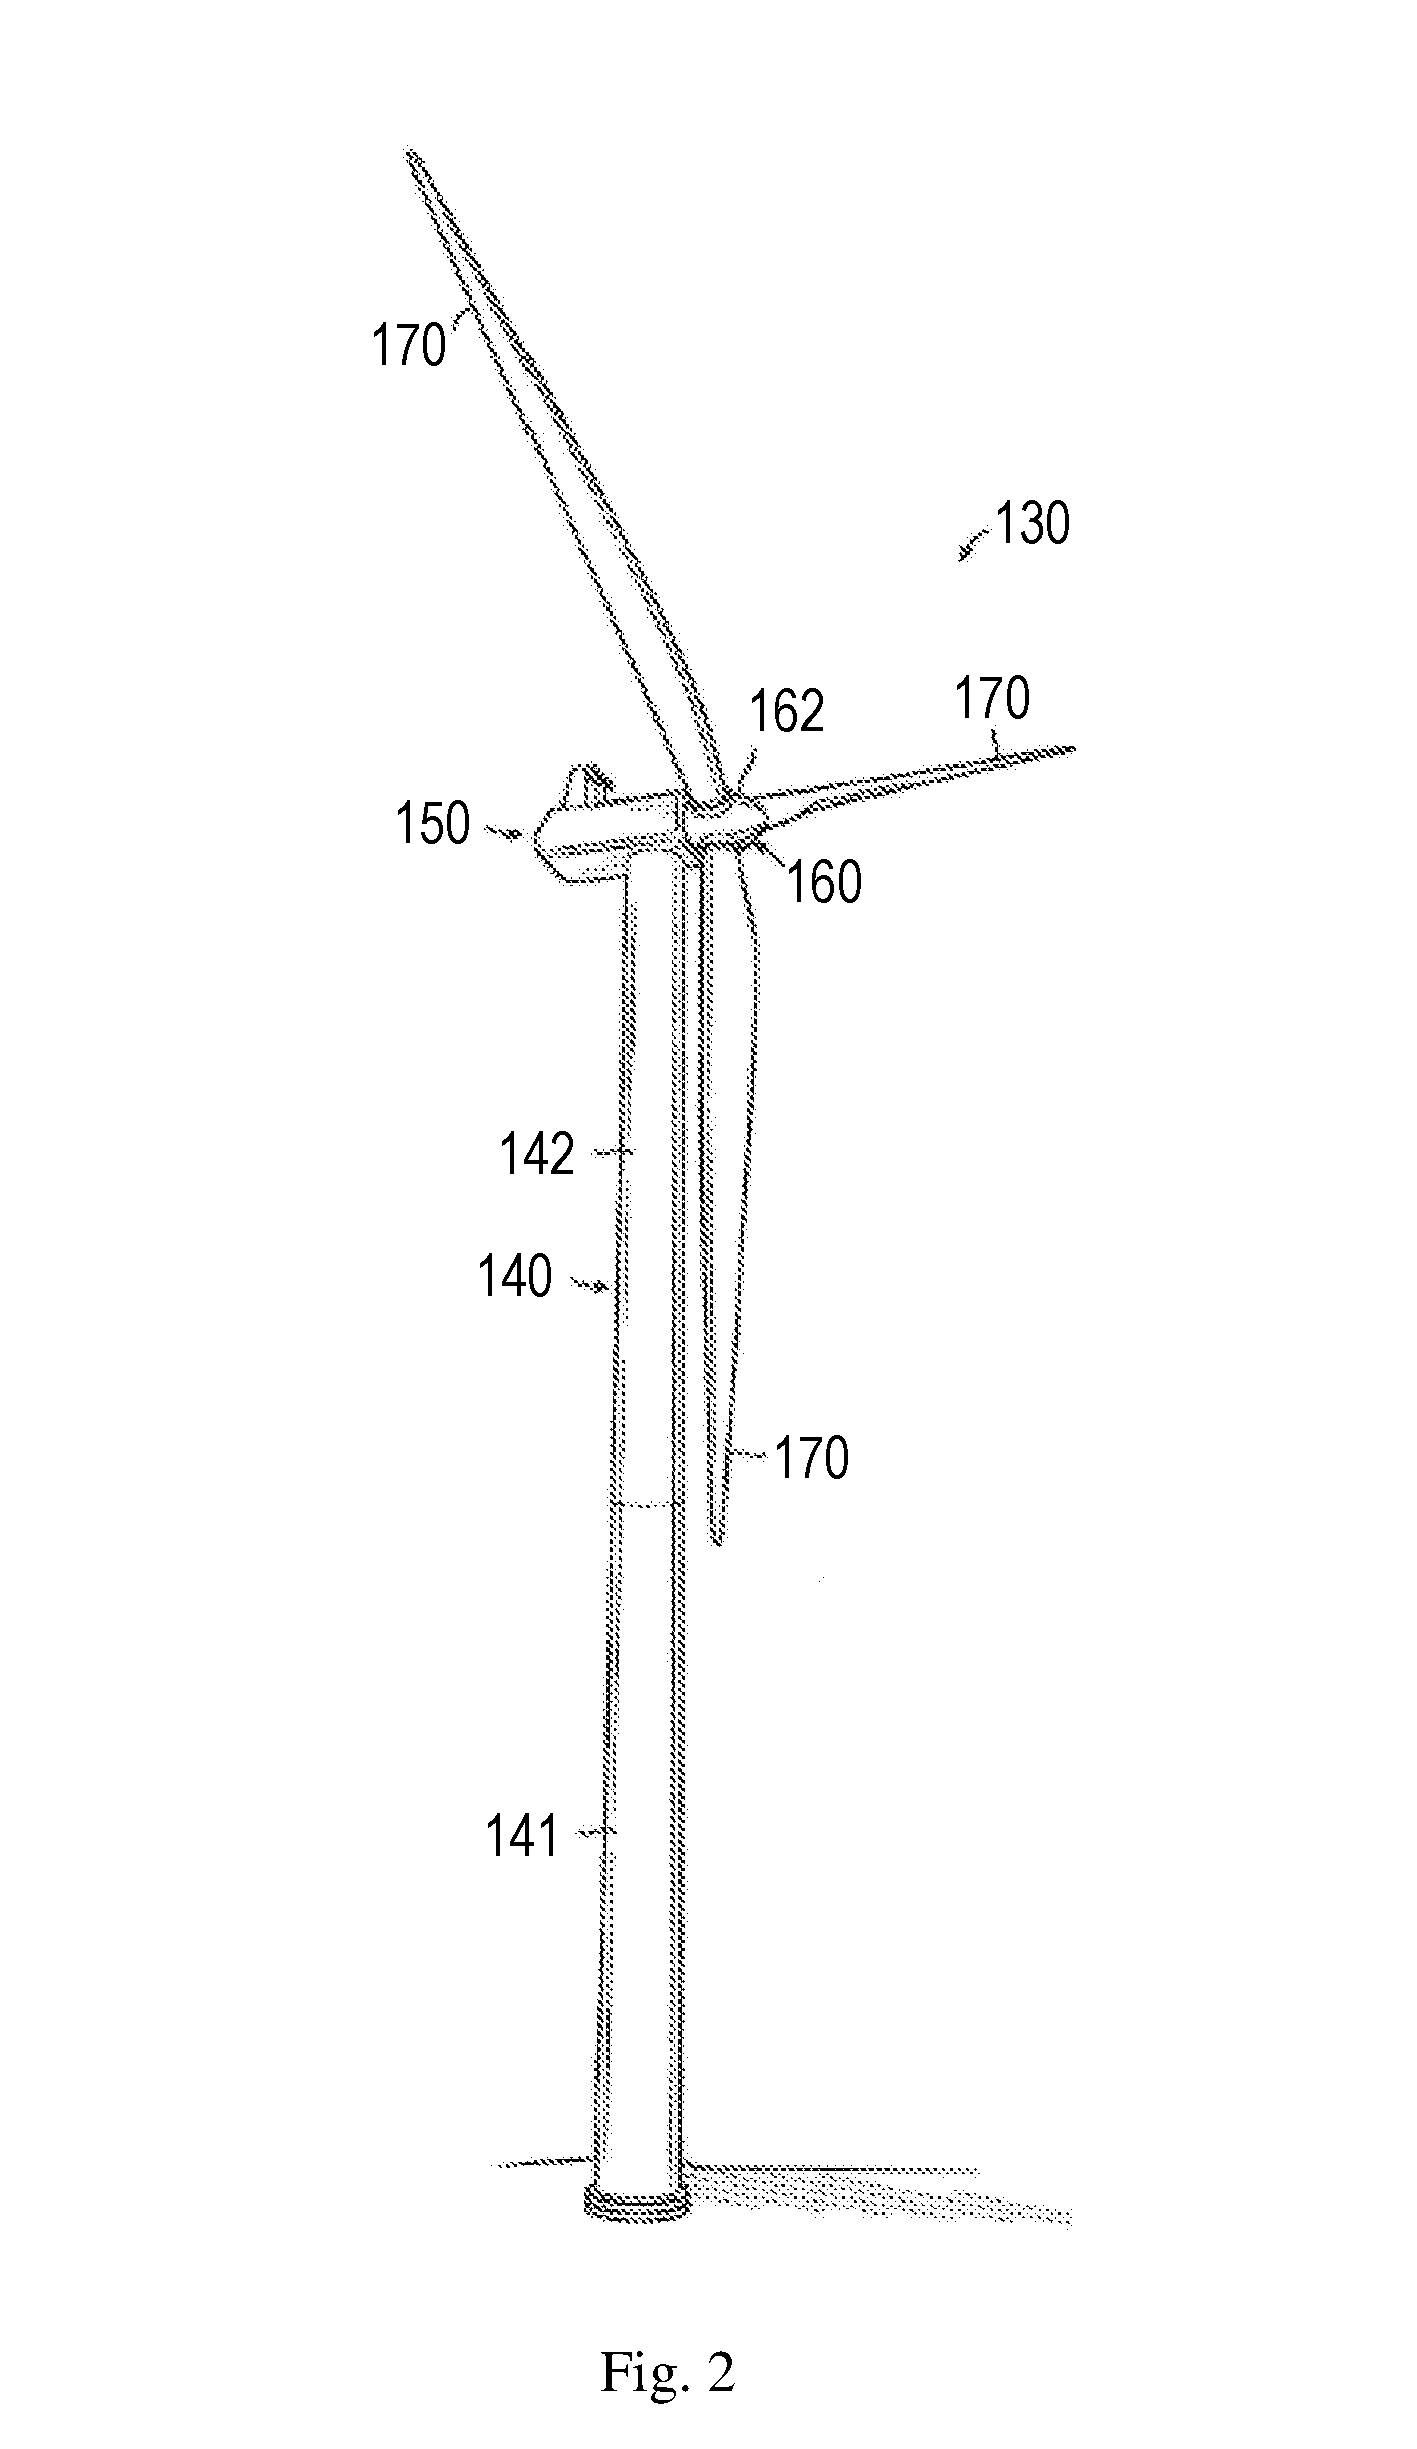 Wind farm and a method of operating a wind farm